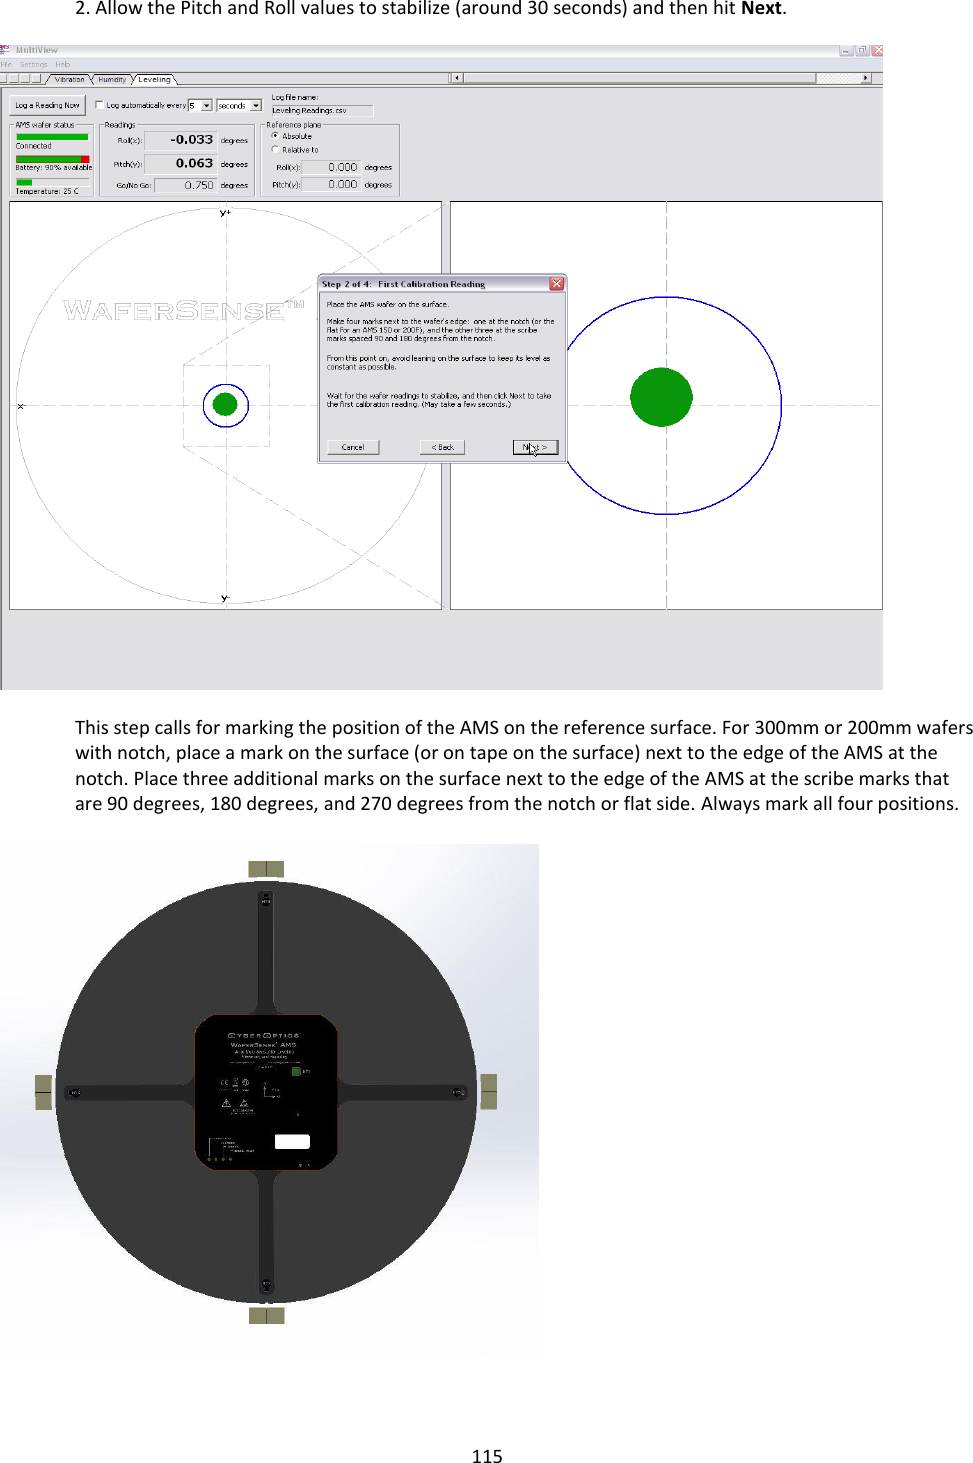   115  2. Allow the Pitch and Roll values to stabilize (around 30 seconds) and then hit Next.    This step calls for marking the position of the AMS on the reference surface. For 300mm or 200mm wafers with notch, place a mark on the surface (or on tape on the surface) next to the edge of the AMS at the notch. Place three additional marks on the surface next to the edge of the AMS at the scribe marks that are 90 degrees, 180 degrees, and 270 degrees from the notch or flat side. Always mark all four positions.     